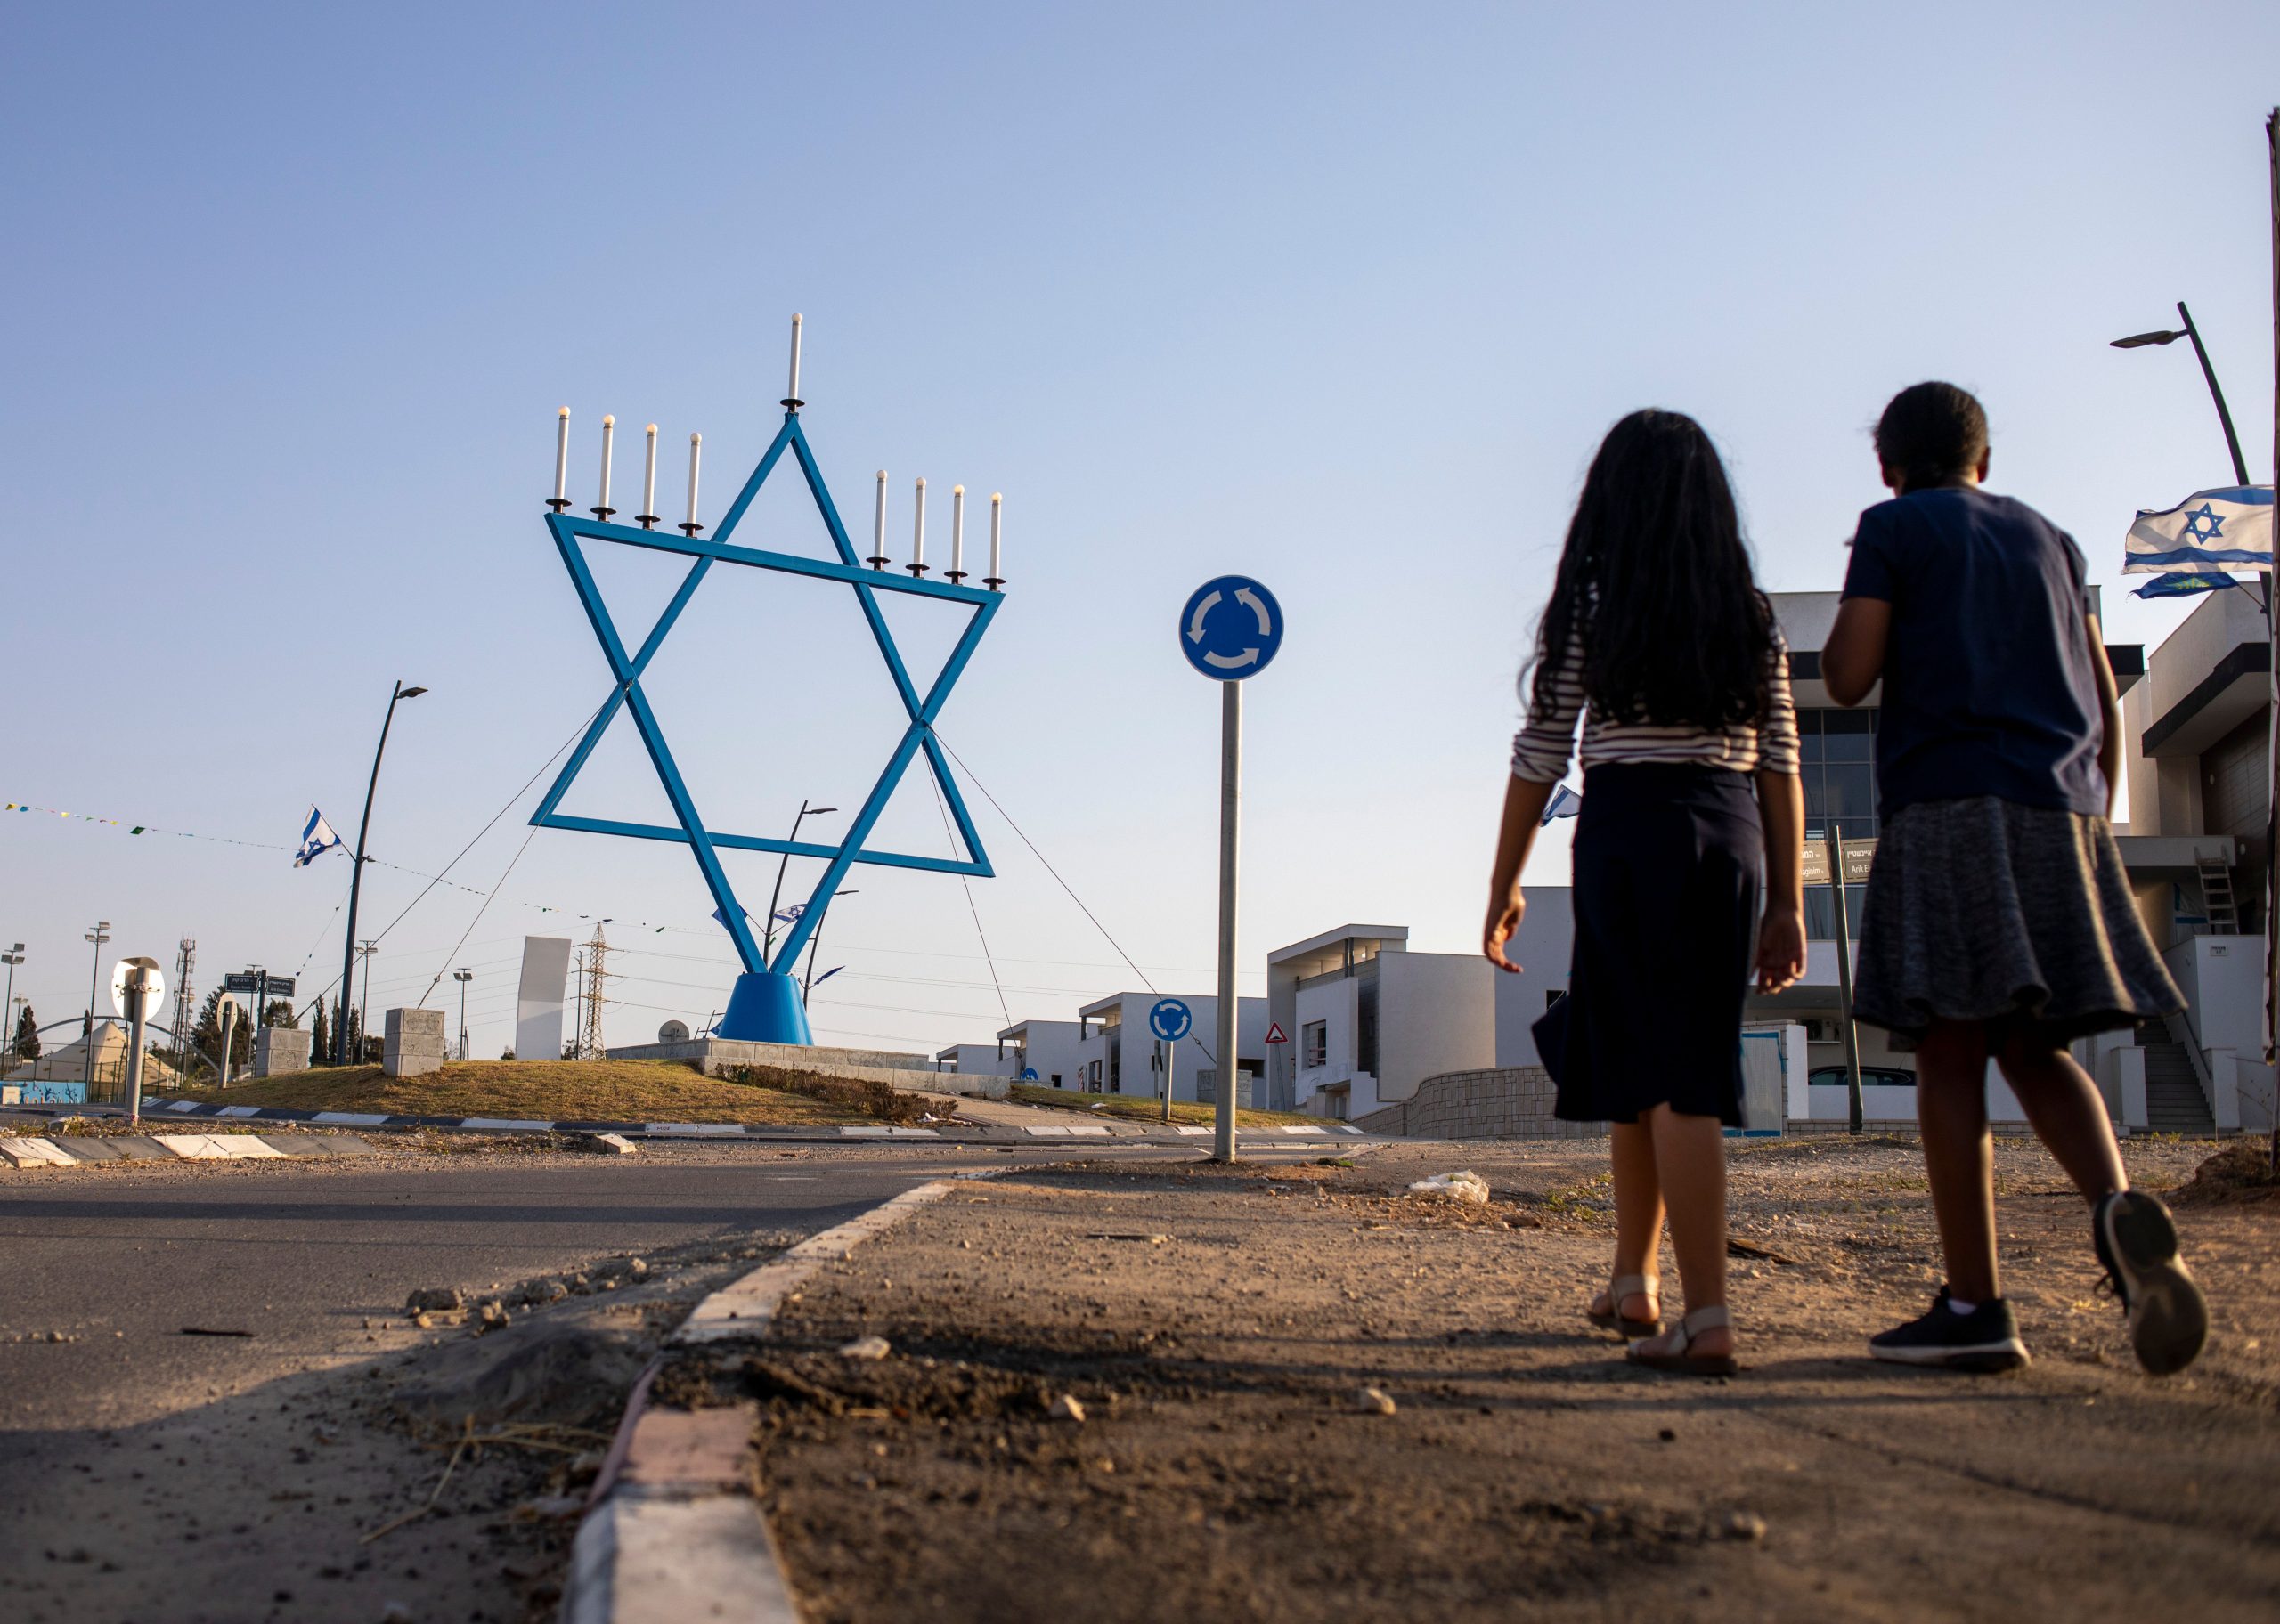 Despite calm, Israeli town copes with scars of rocket fire